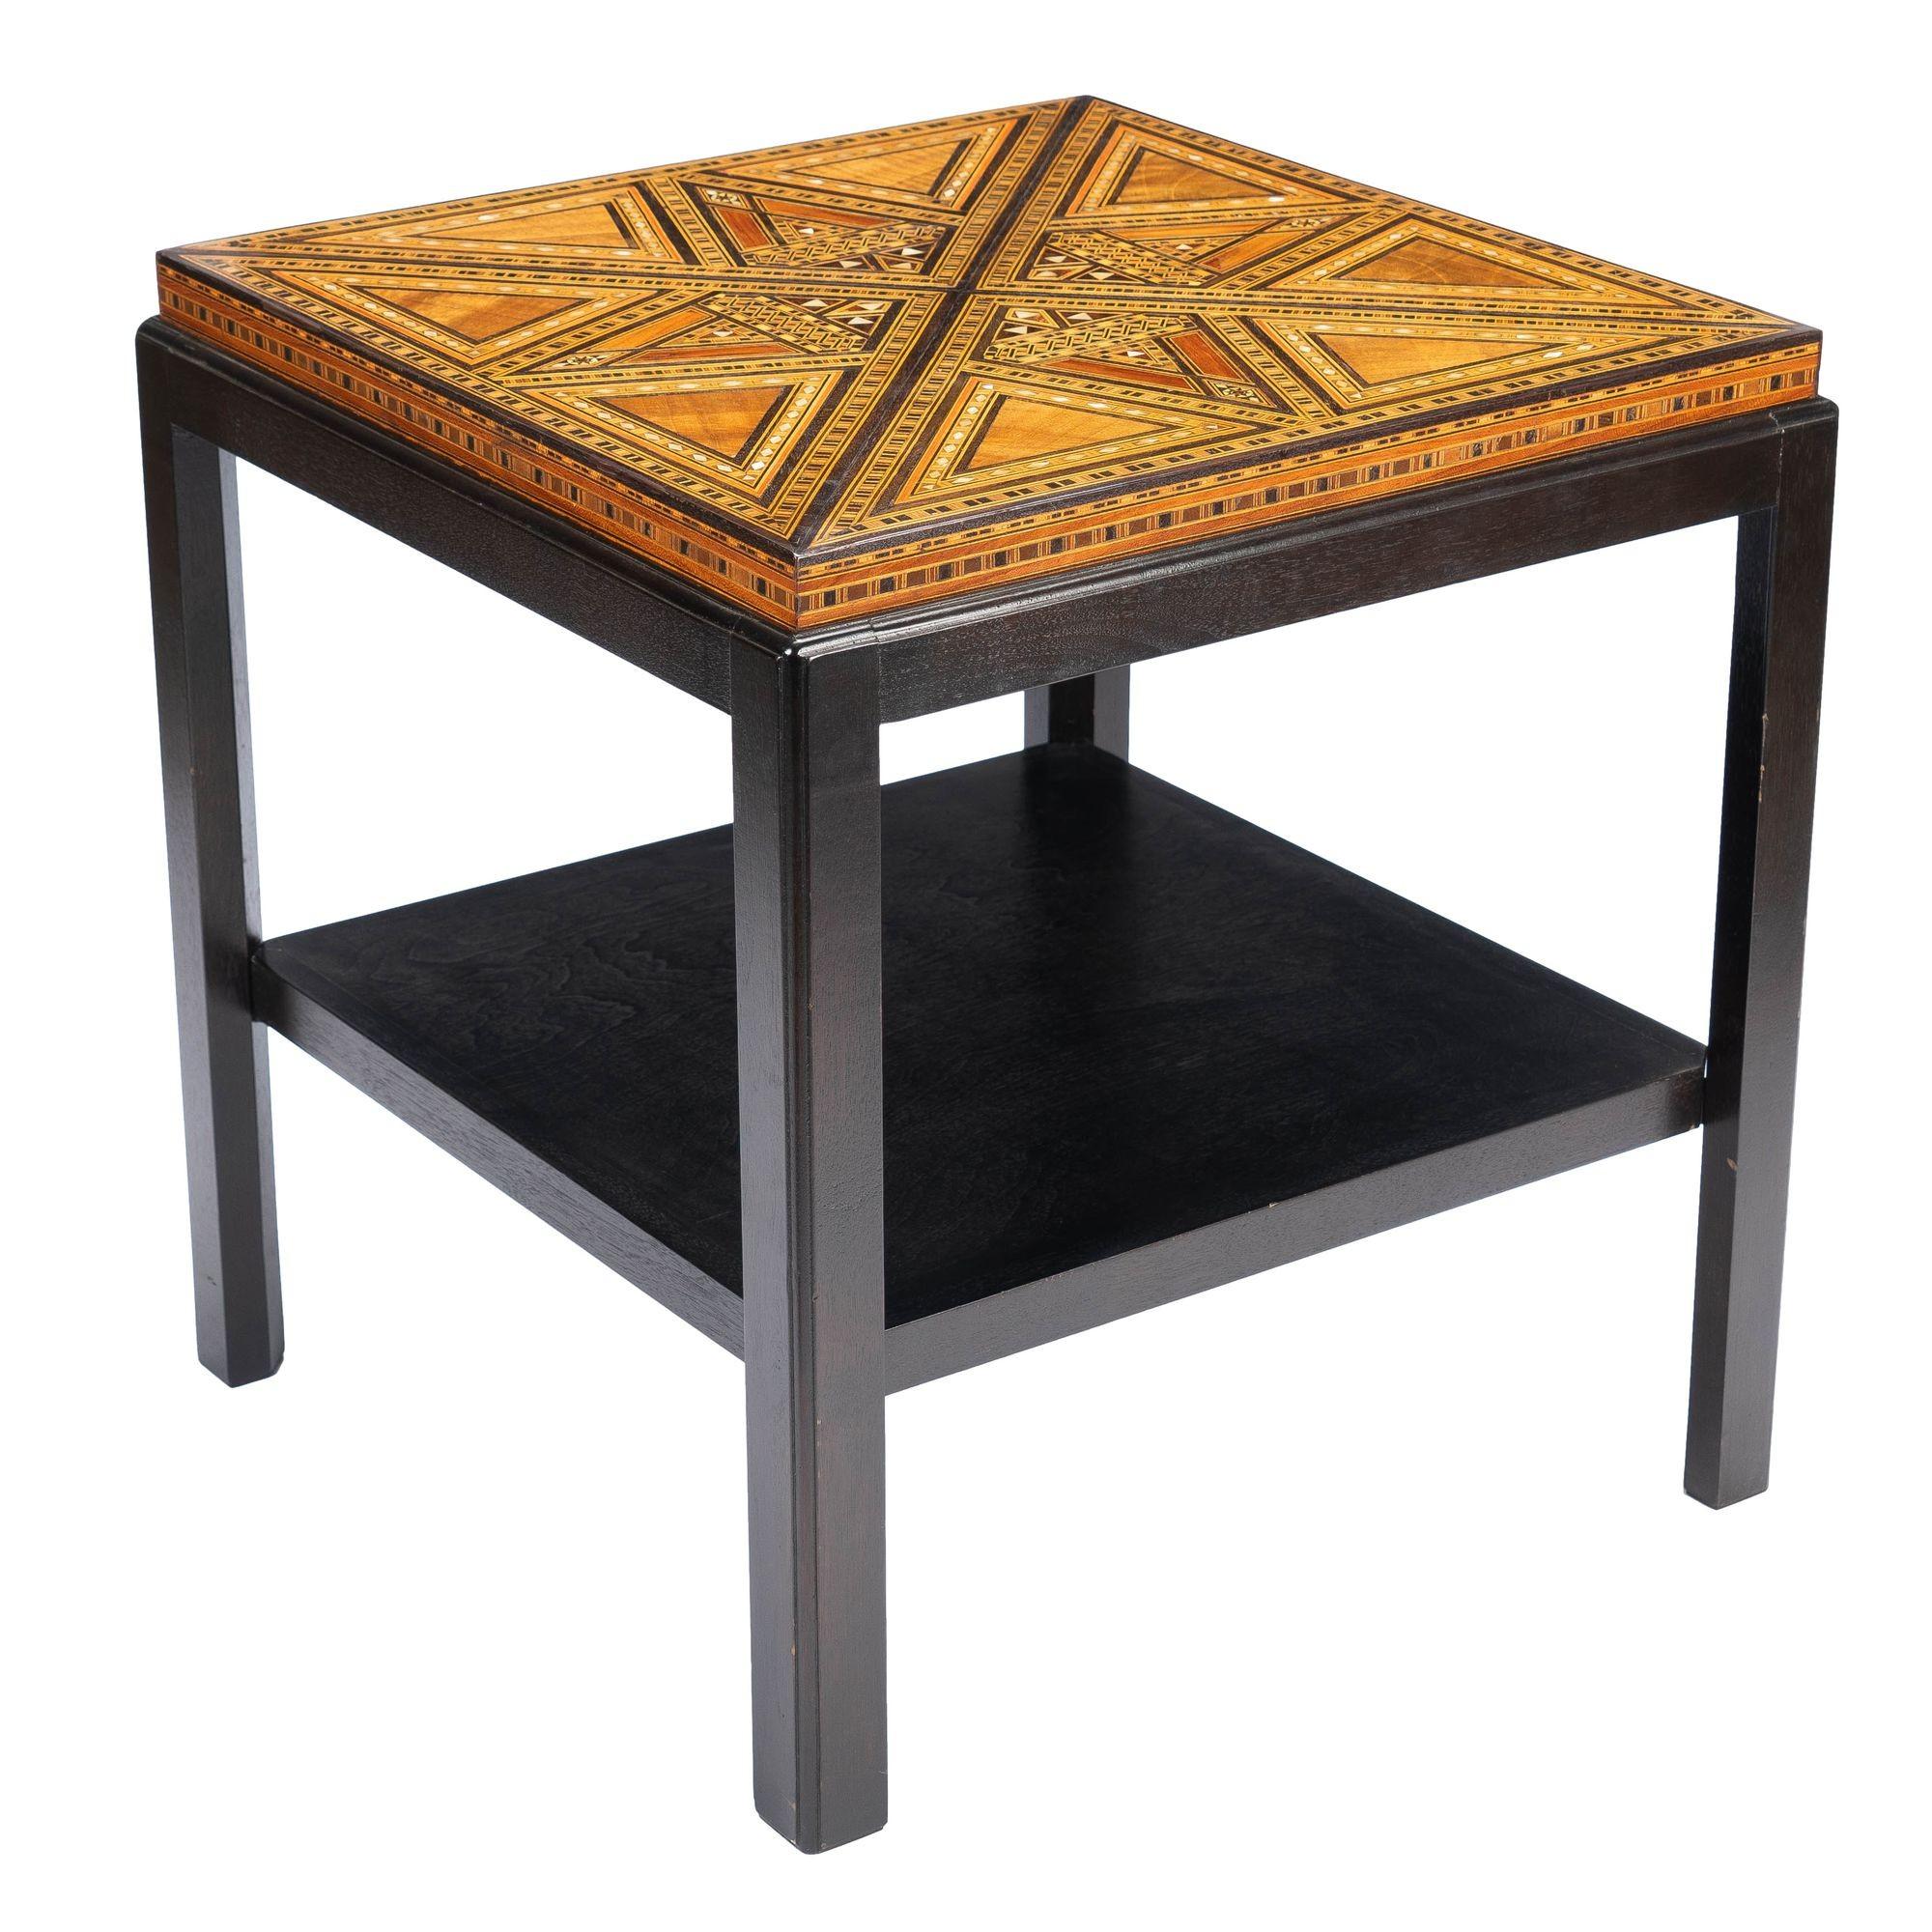 Islamic Damascus Inlaid Table Top on Custom Stand, c. 1900 For Sale